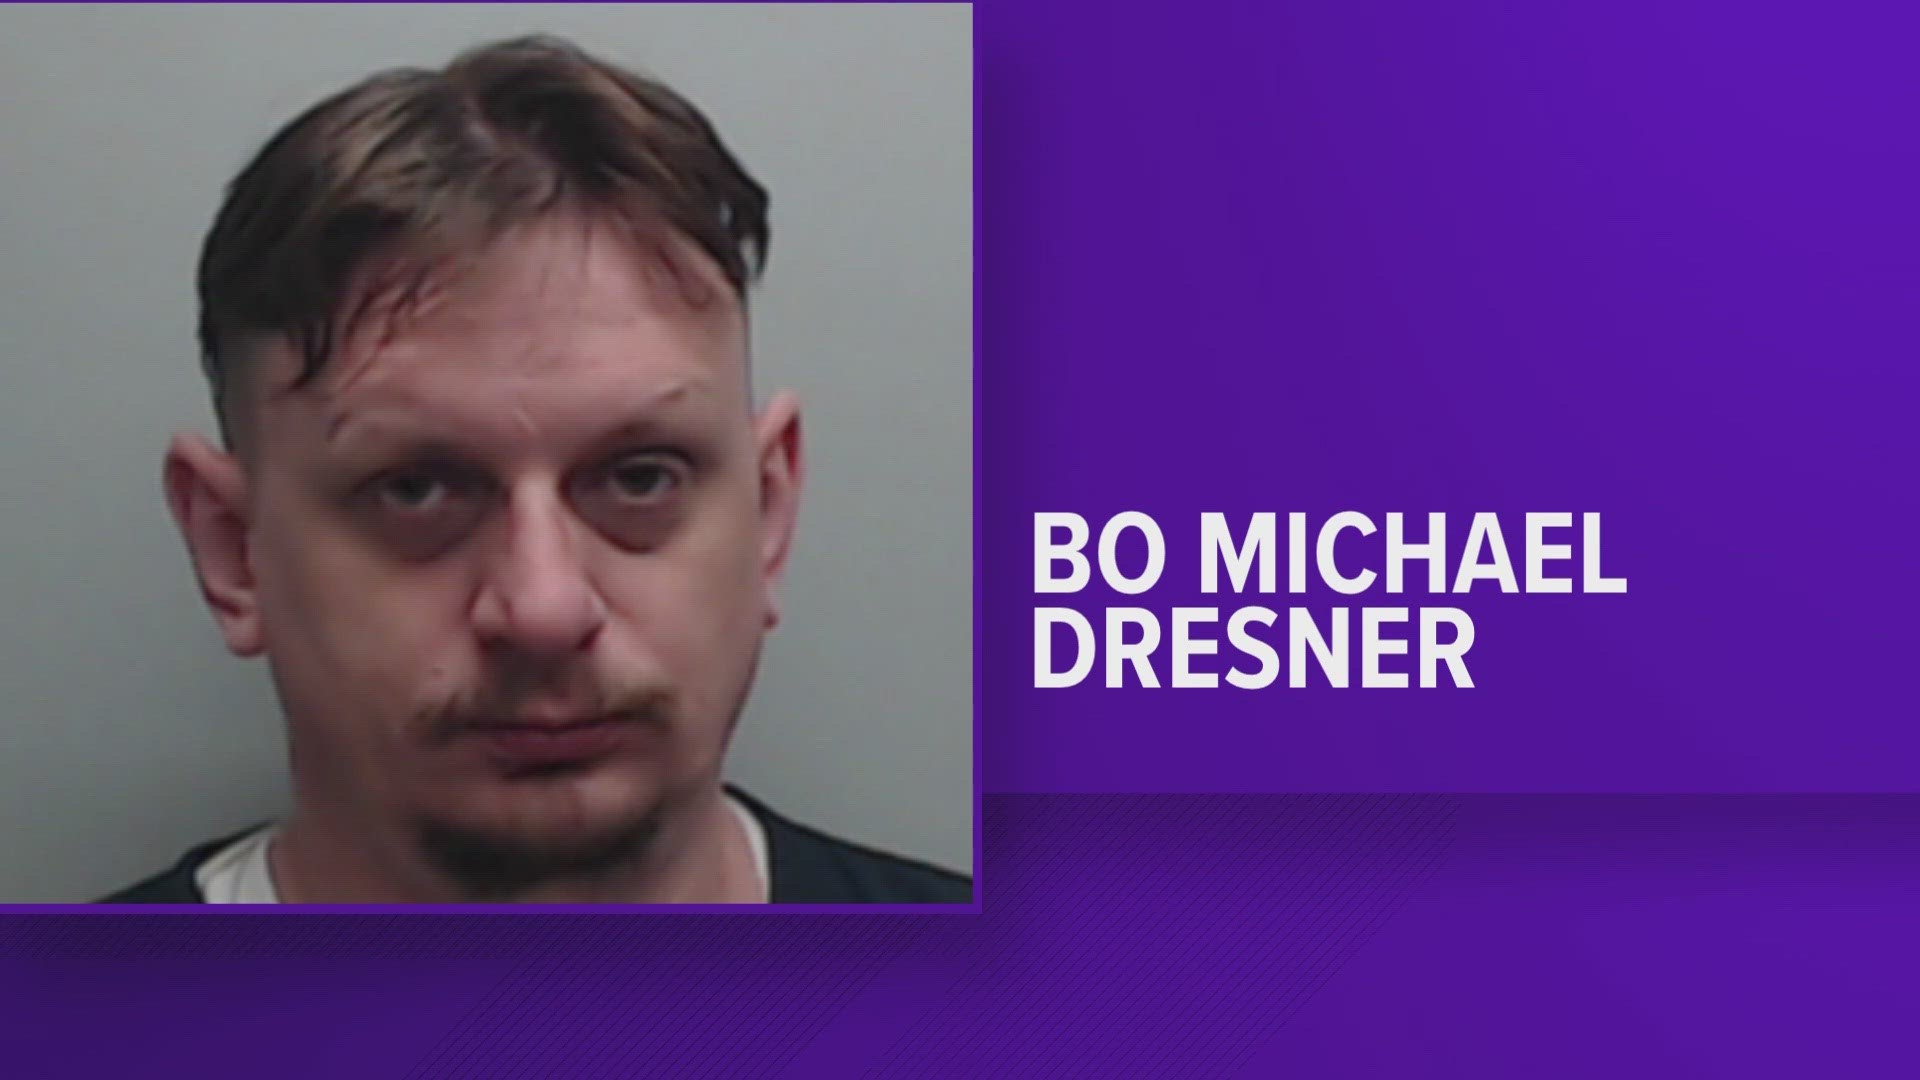 A Hays County jury sentenced 44-year-old Bo Michael Dresner on Monday morning. He was convicted of 65 counts of sexual abuse and child pornography charges.